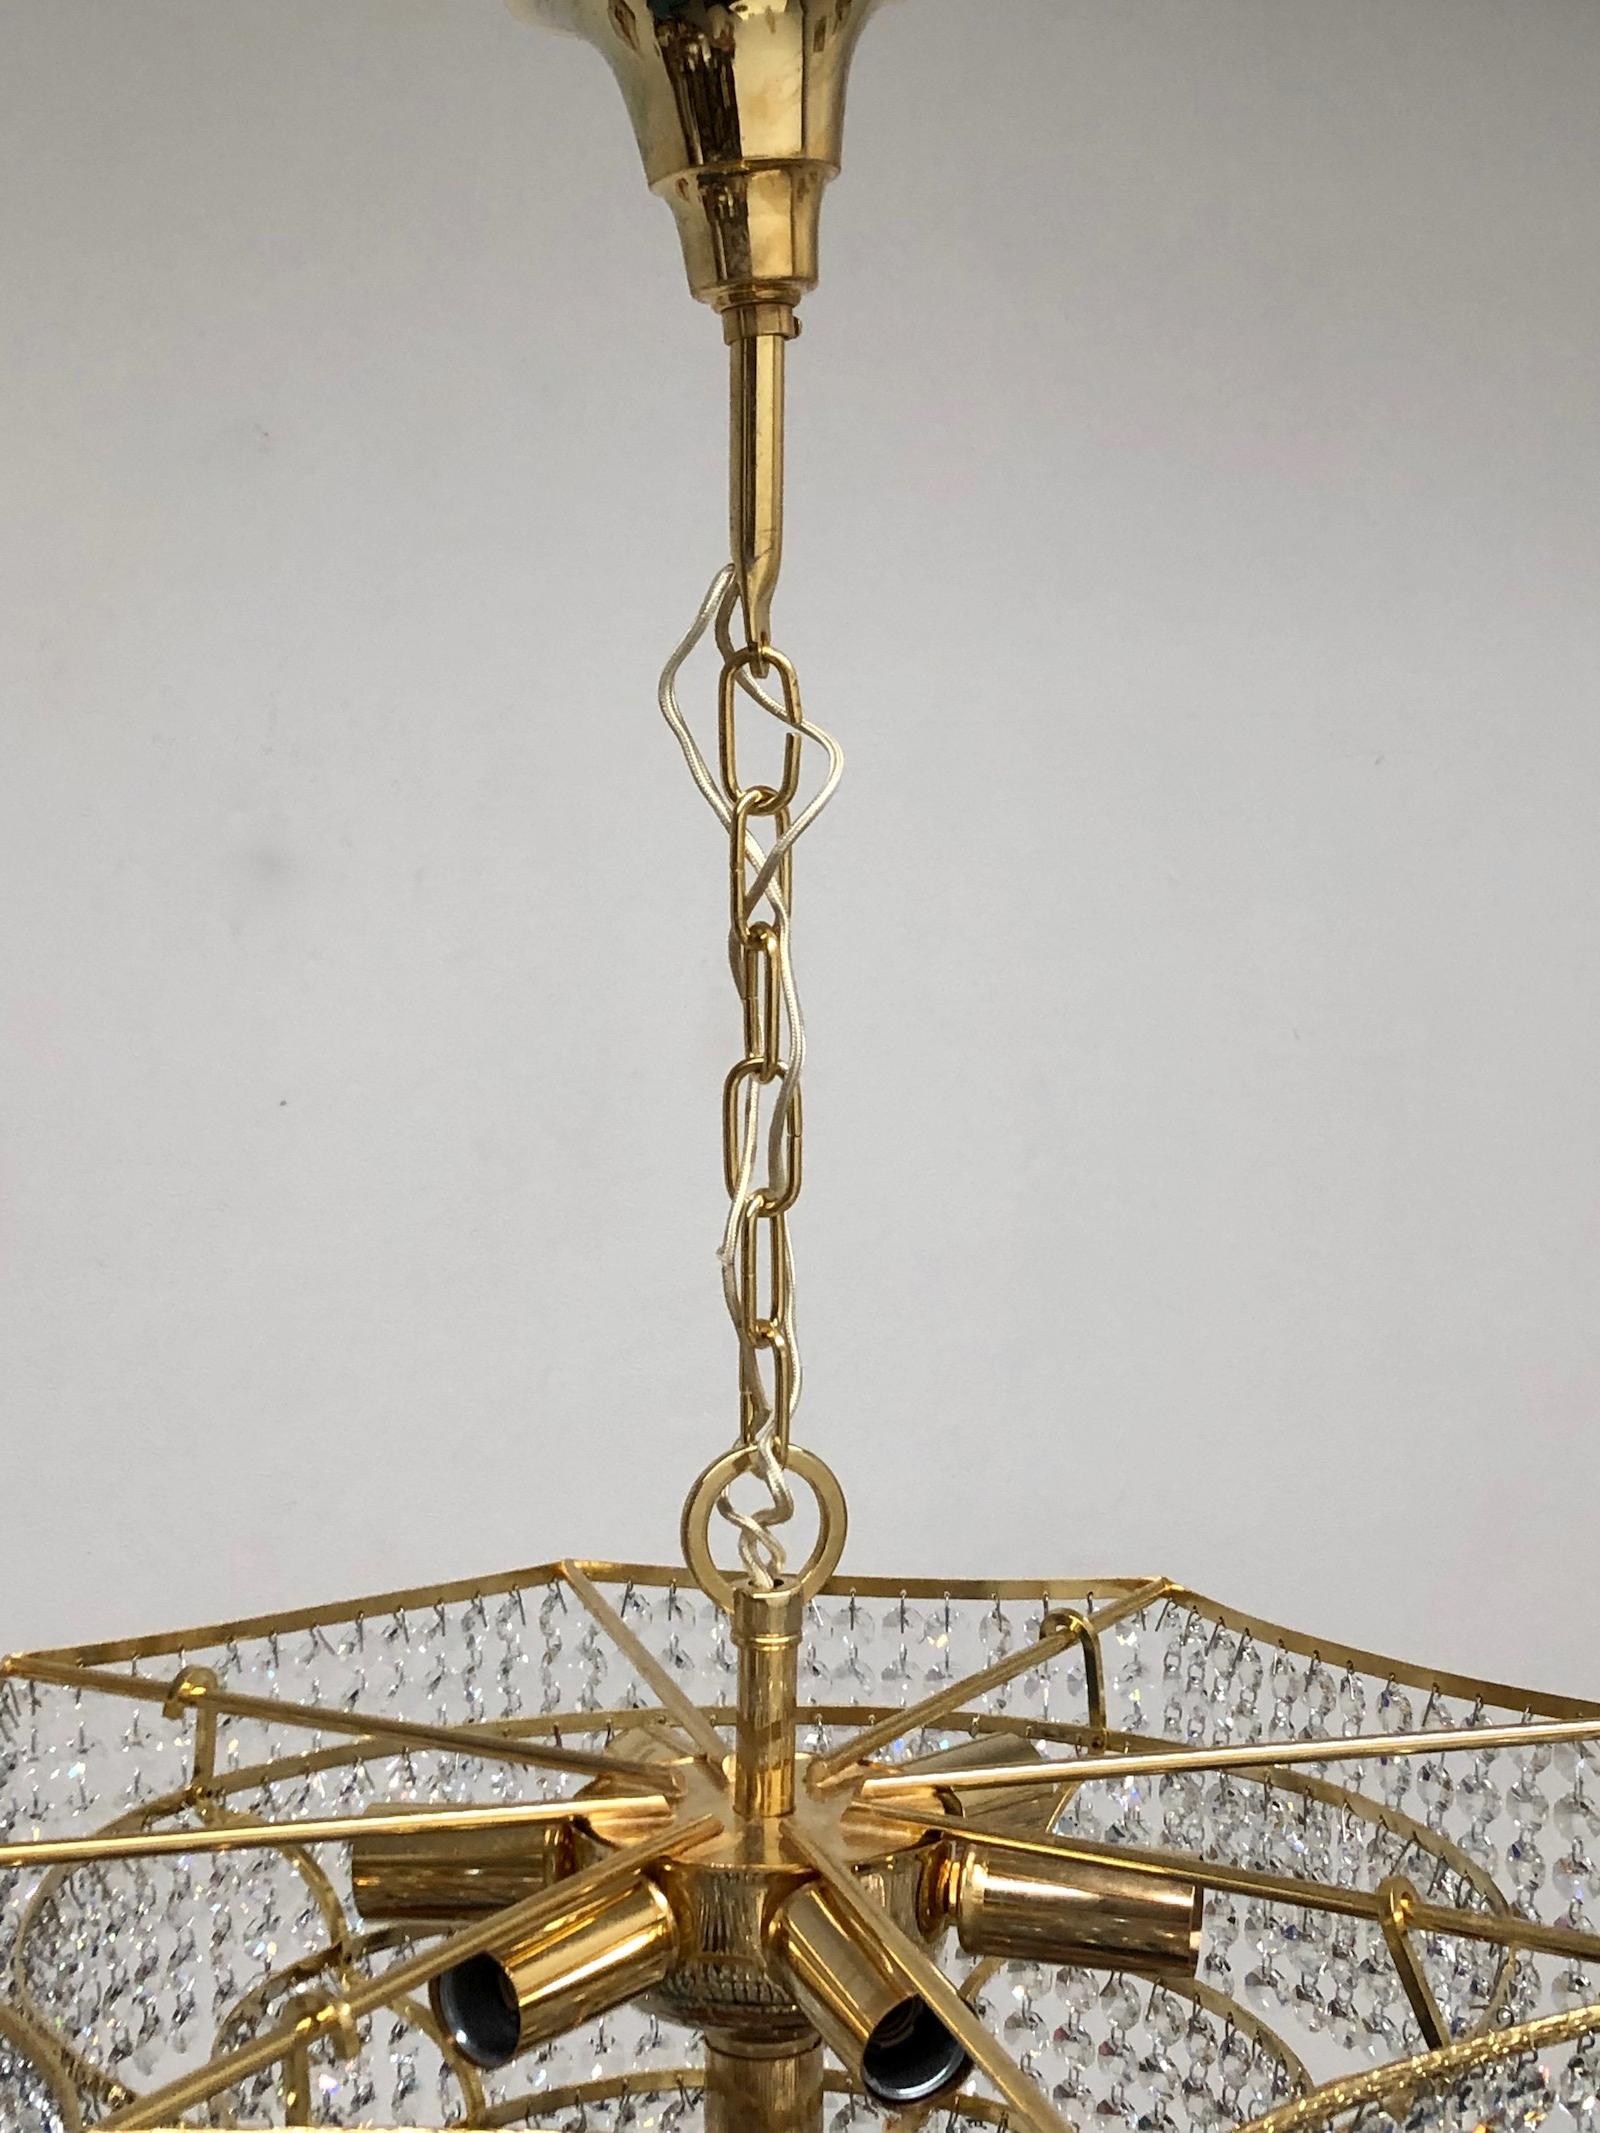 Brass and Crystal Glass Waterfall Chandelier, Richard Essig, Germany, 1960s For Sale 5